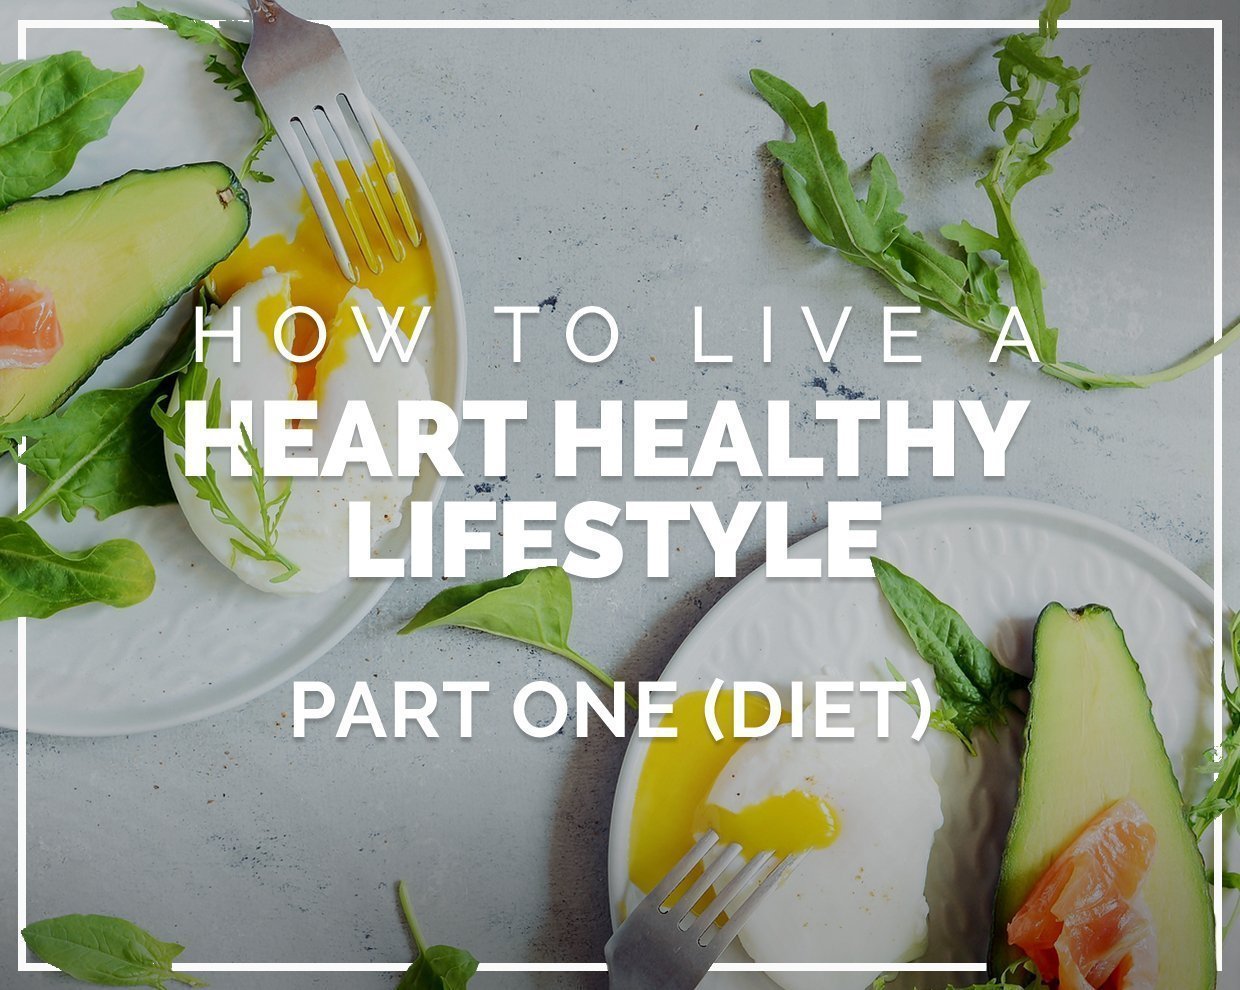 How to live a heart healthy lifestyle - Part One